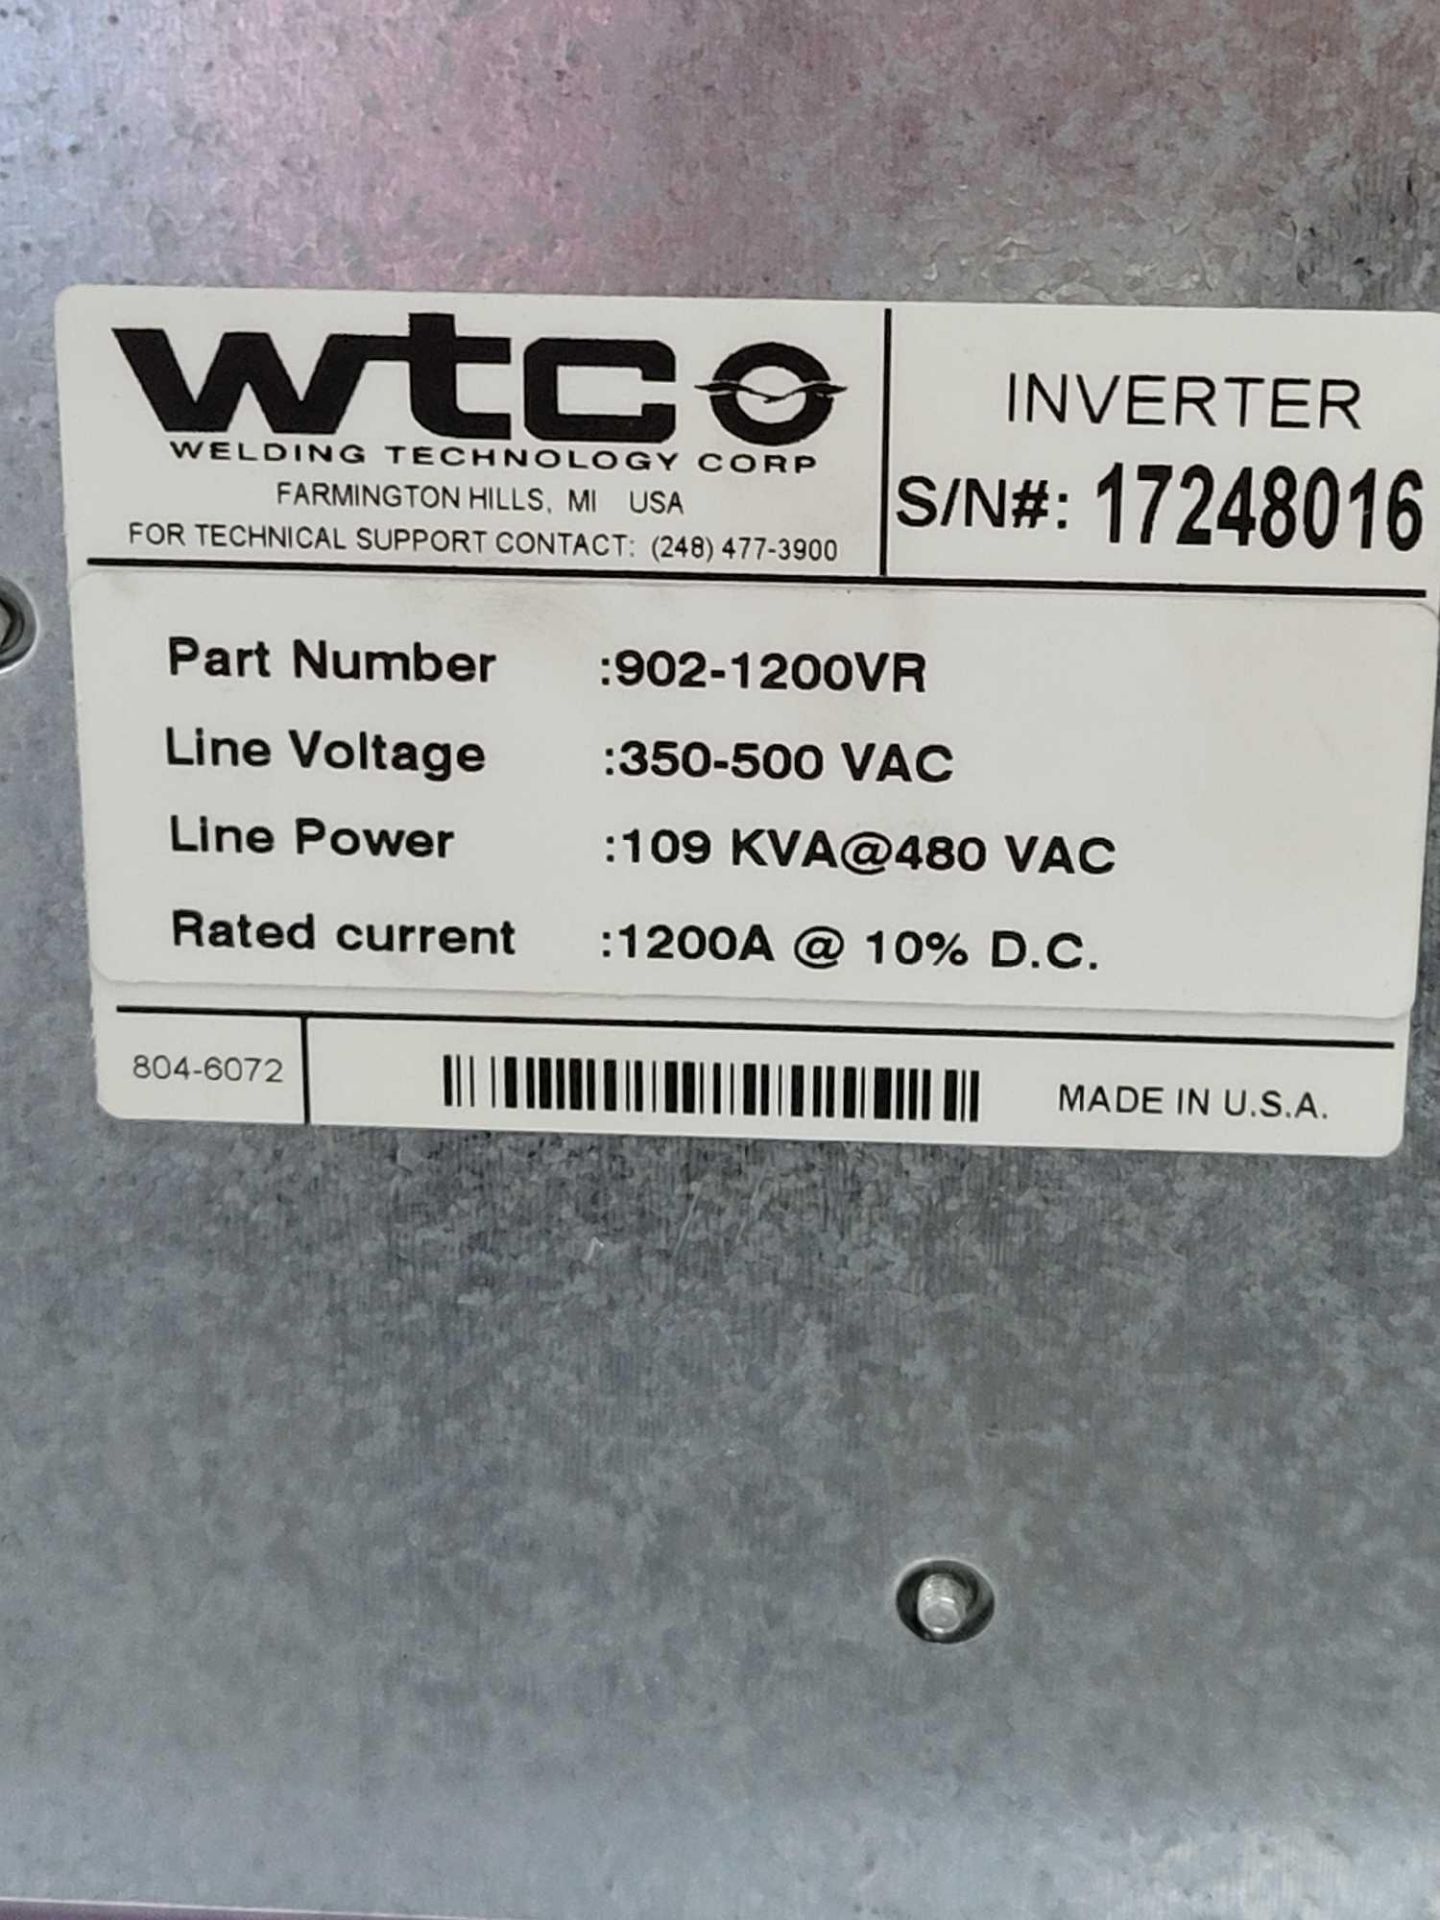 WTC 902-1200VR / Gen 6 MFDC Inverter  /  Lot Weight: 105 lbs - Image 2 of 5